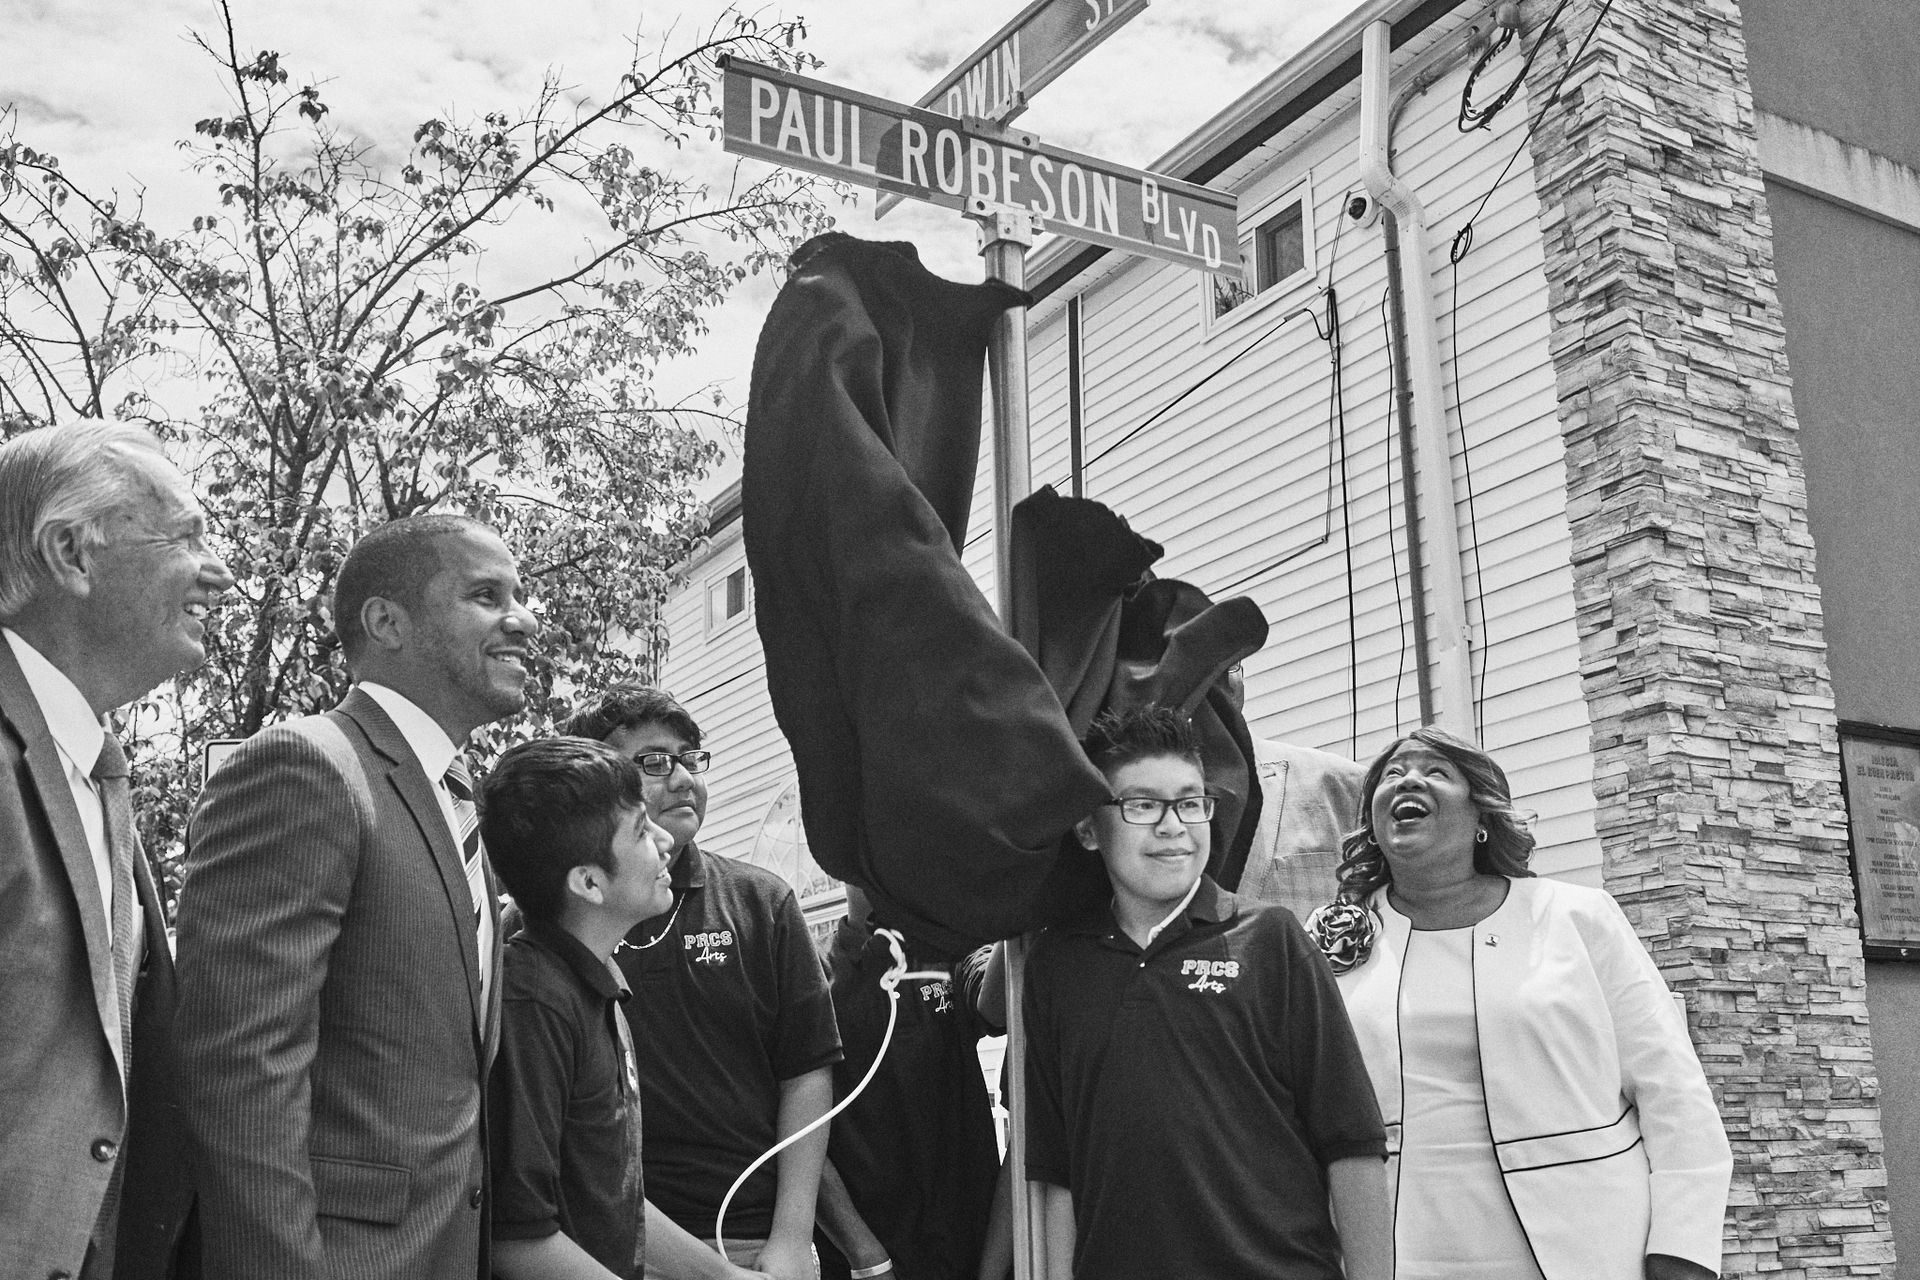 Mayor Cahill and other members of local government and education unveil the street sign.